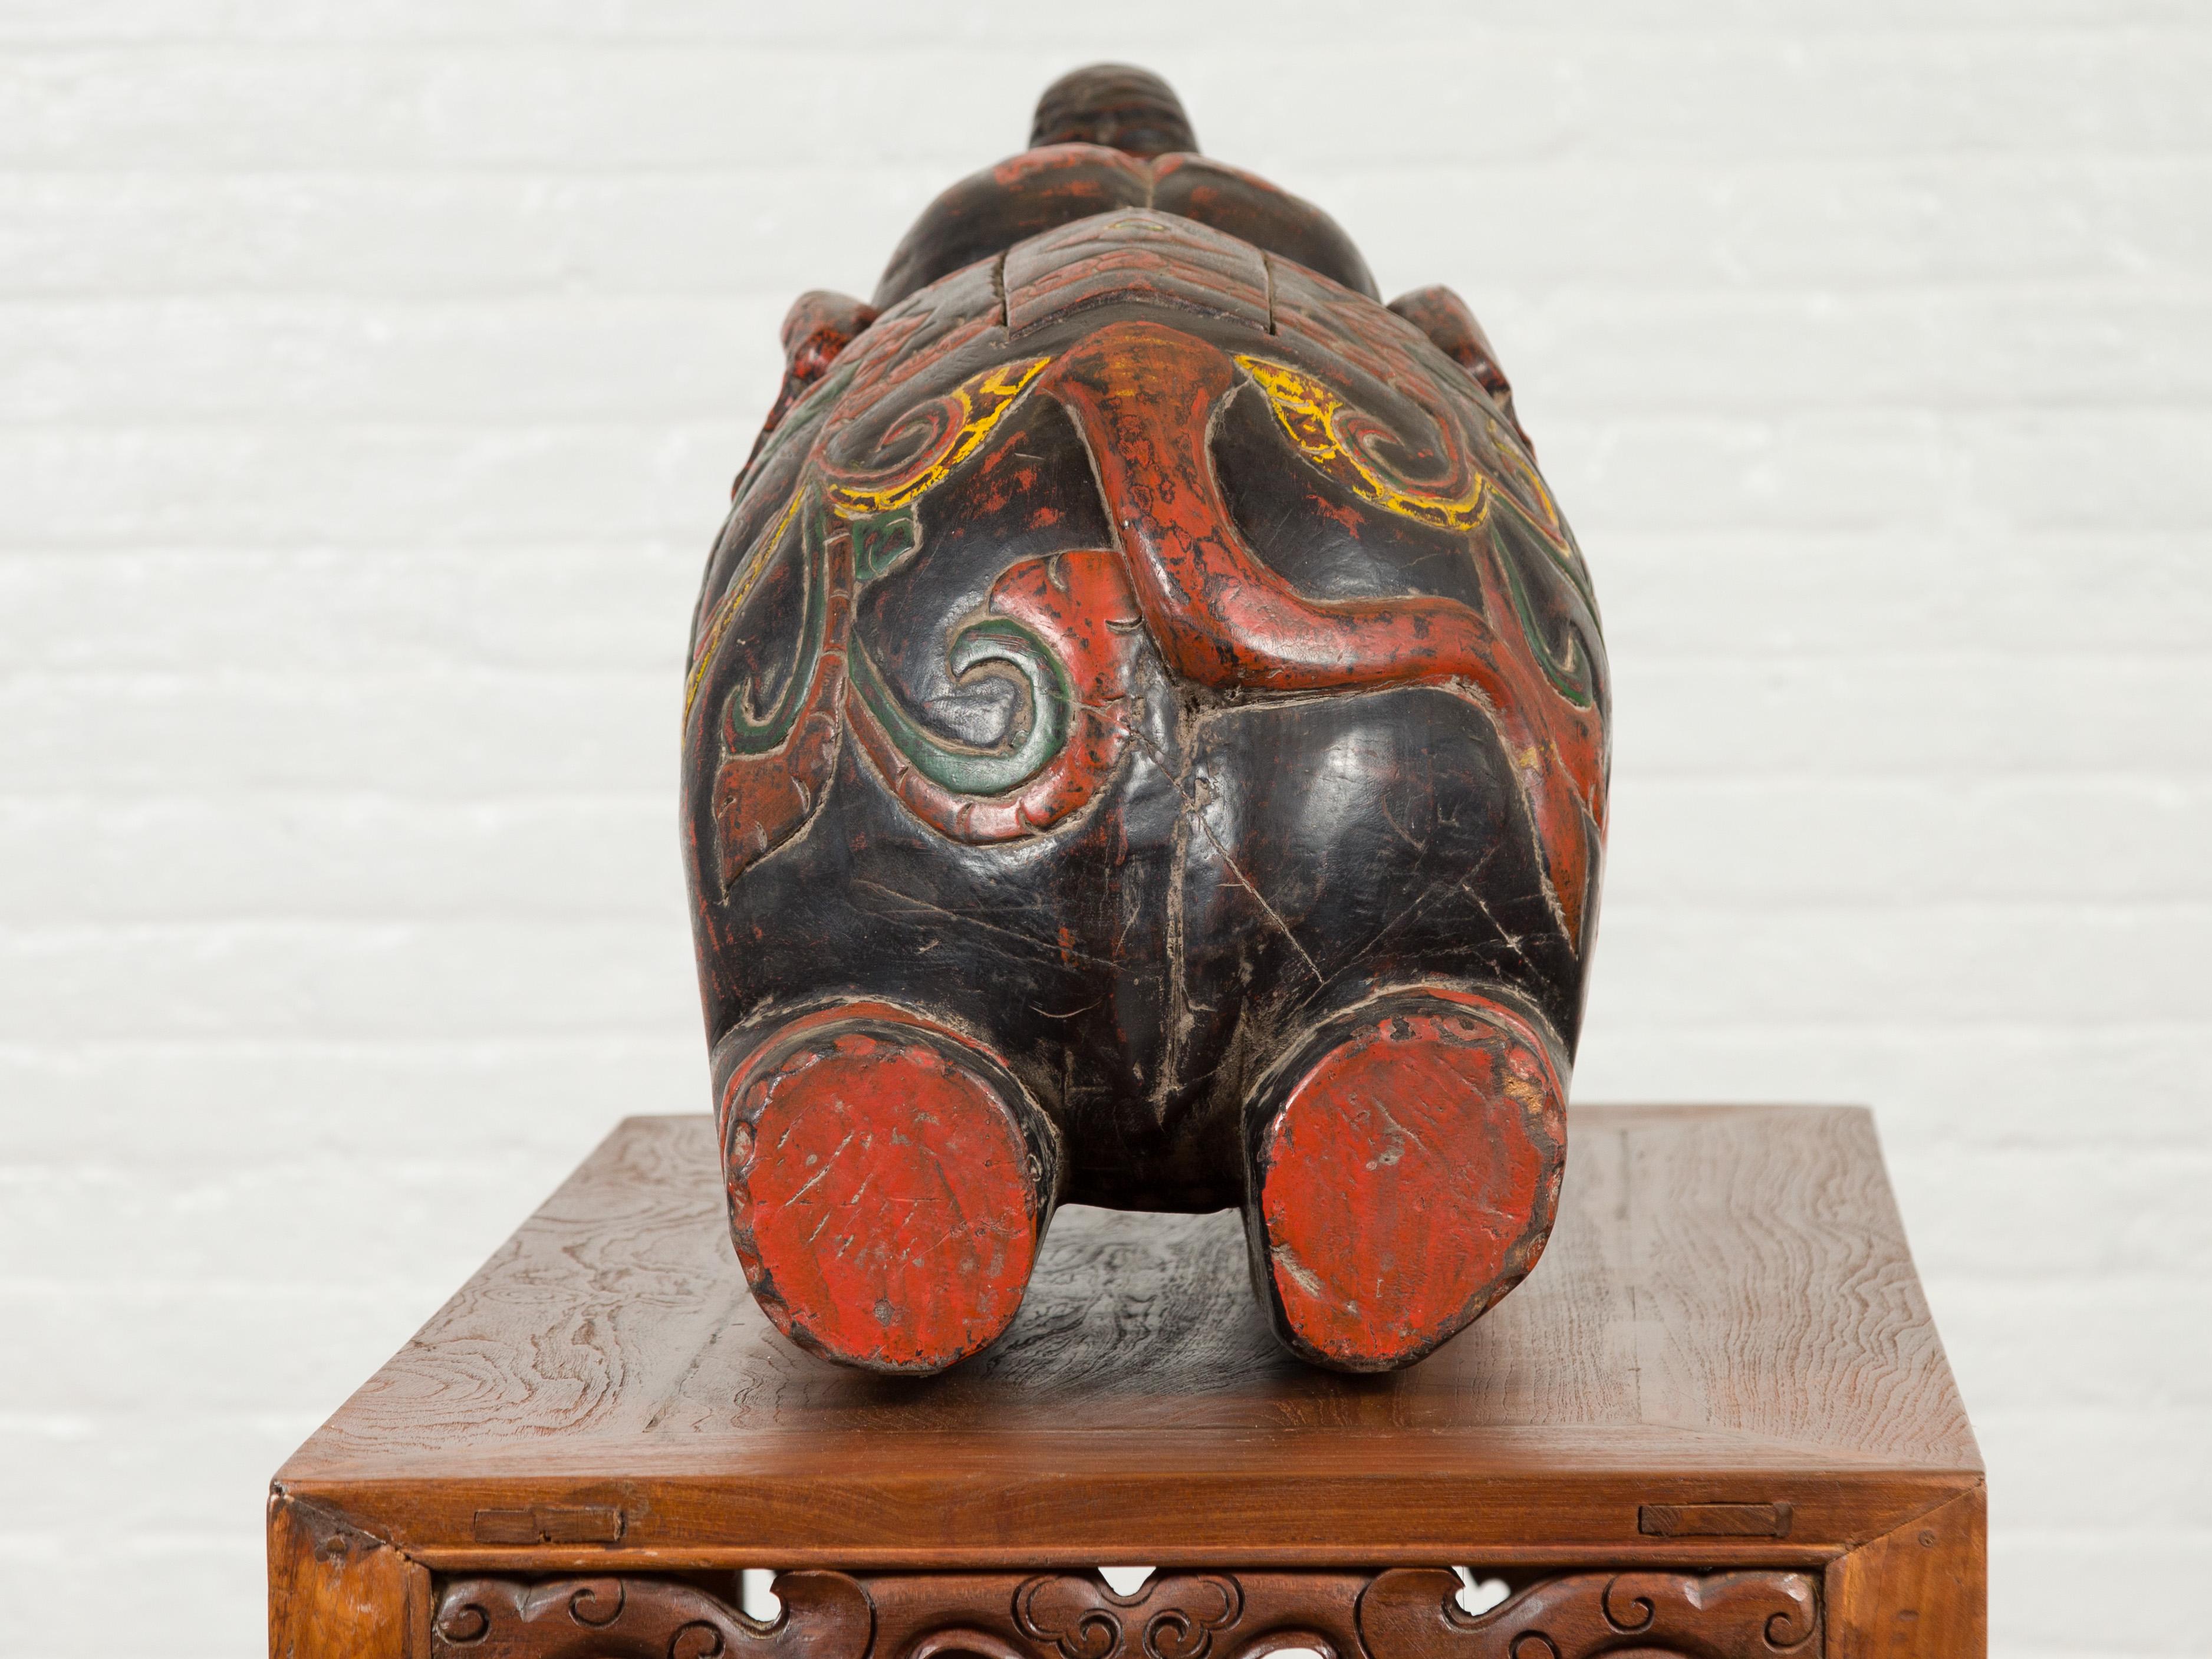 Handmade Asian Elephant Sculpture with Incised Decor and Multi-Color Finish 4